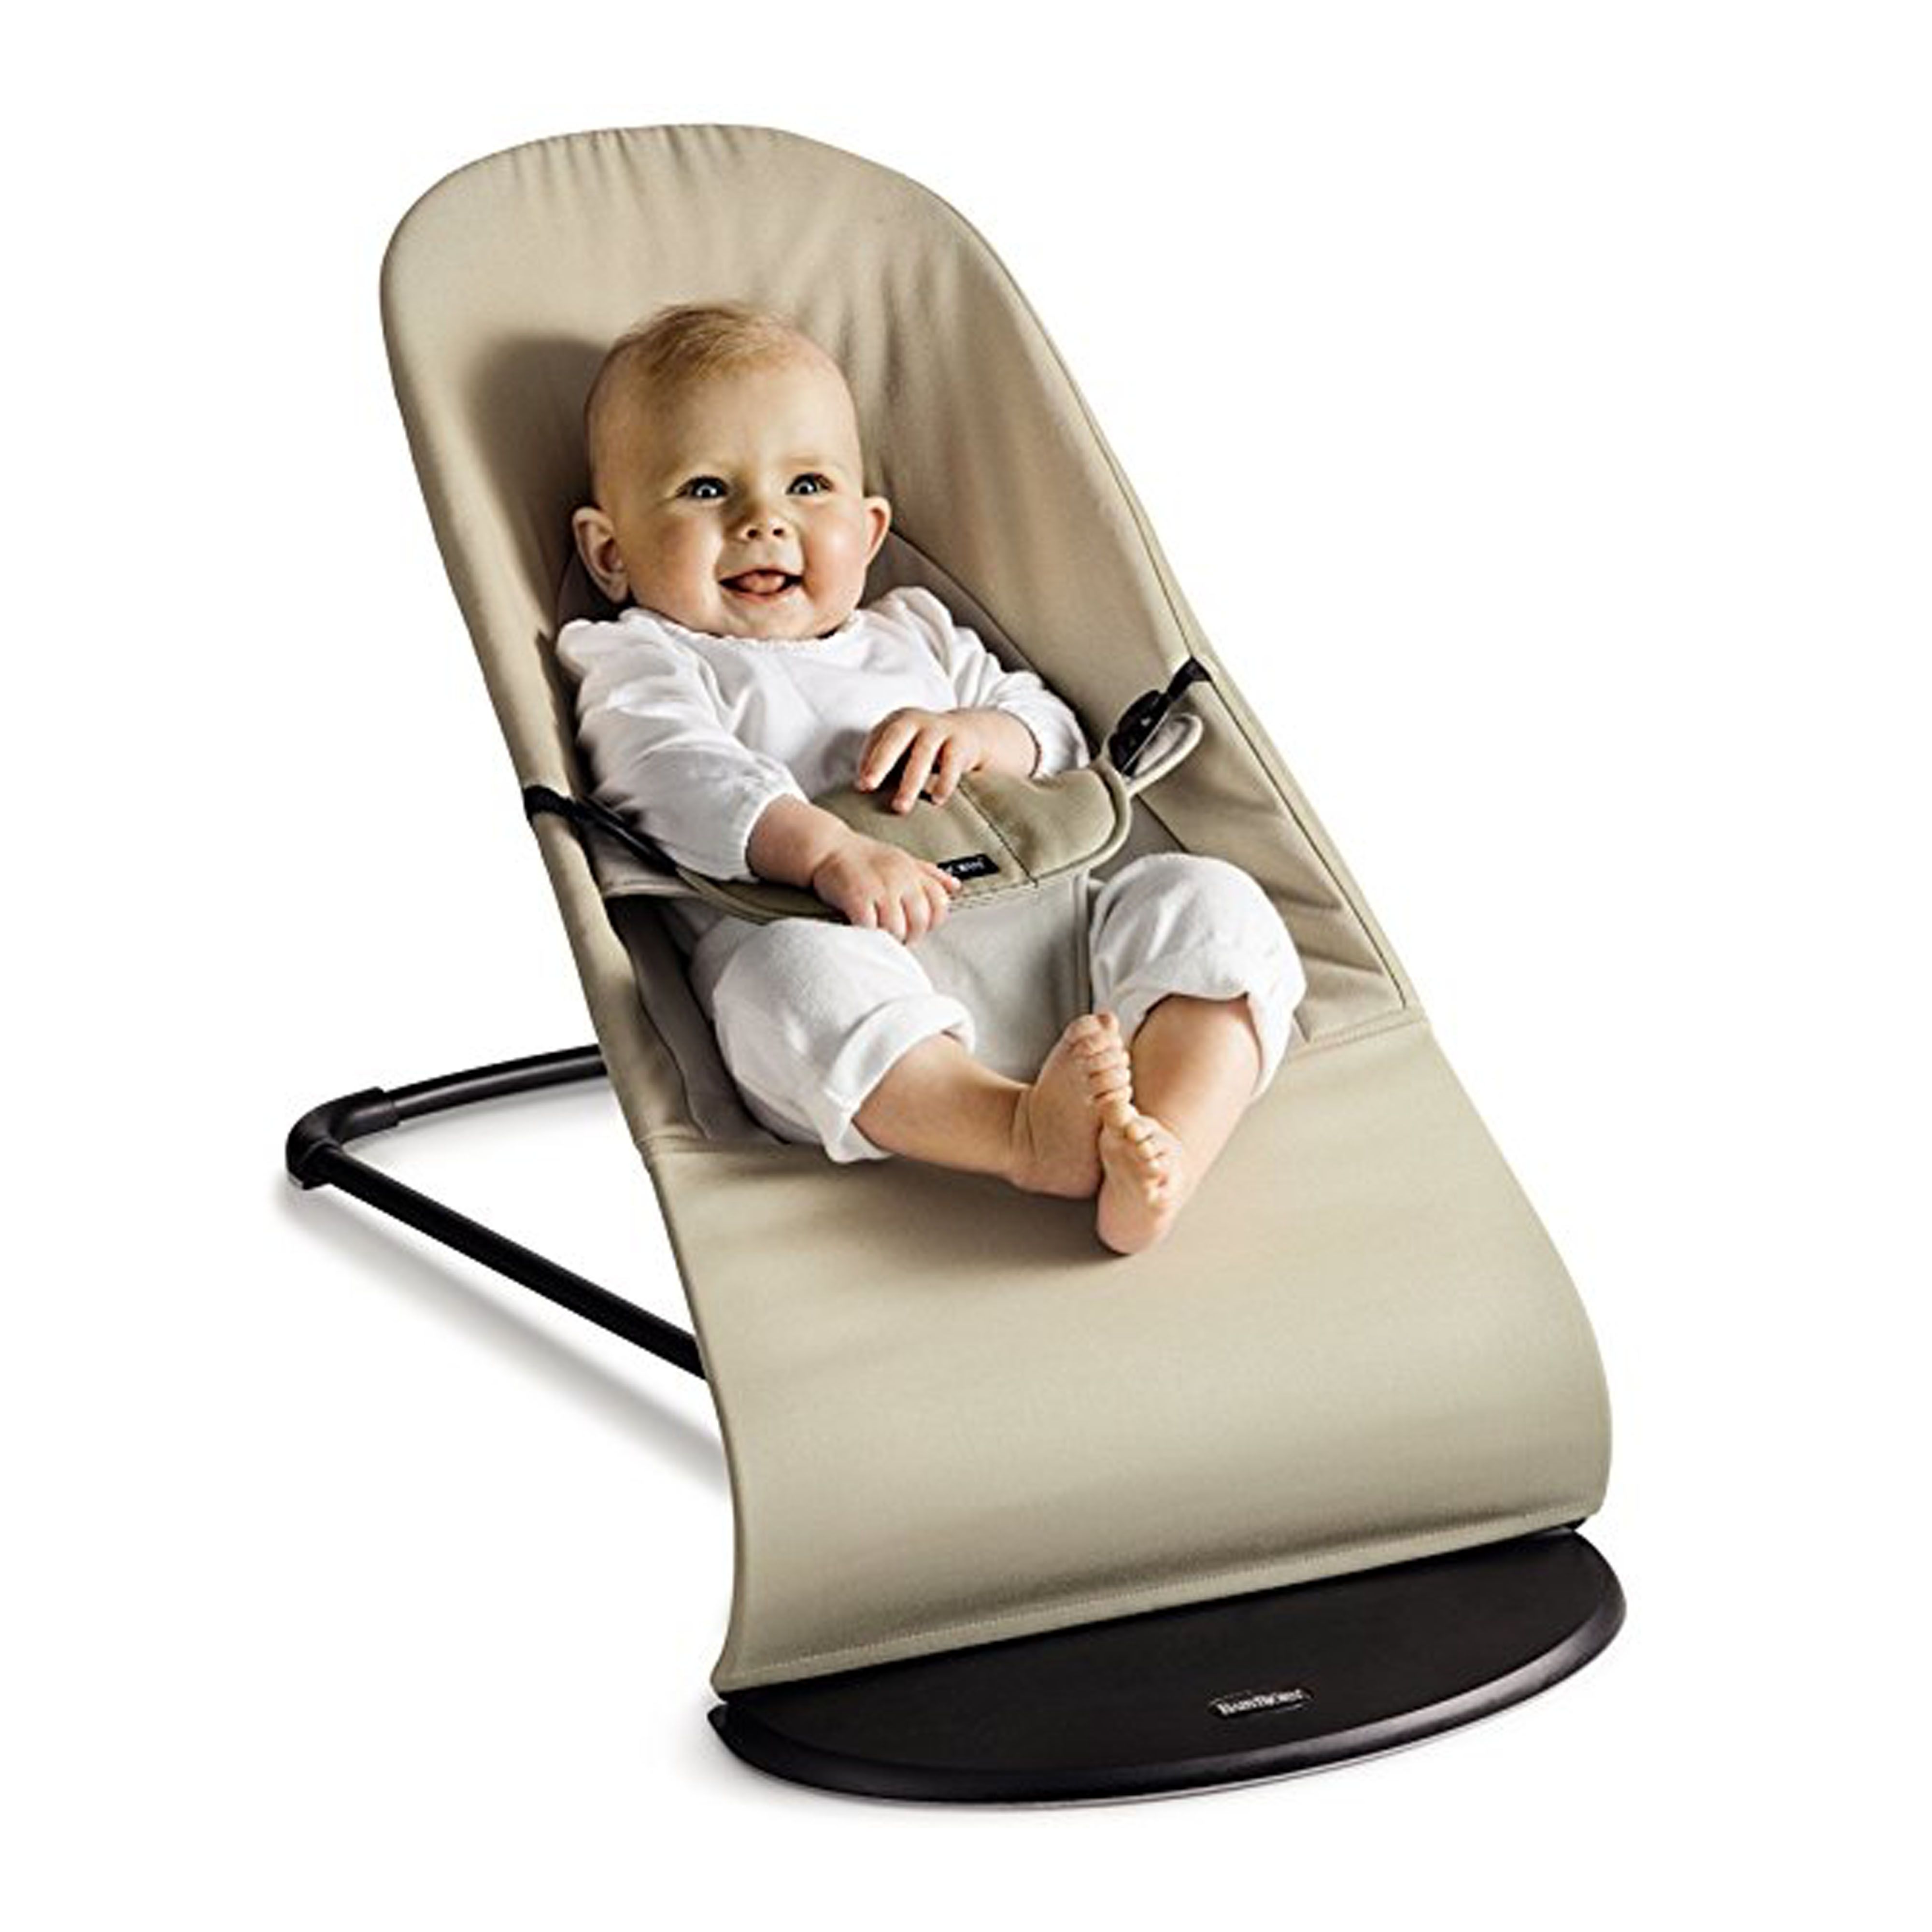 BabyBjorn Bouncer Balance Soft Review, Price and Features - Pros